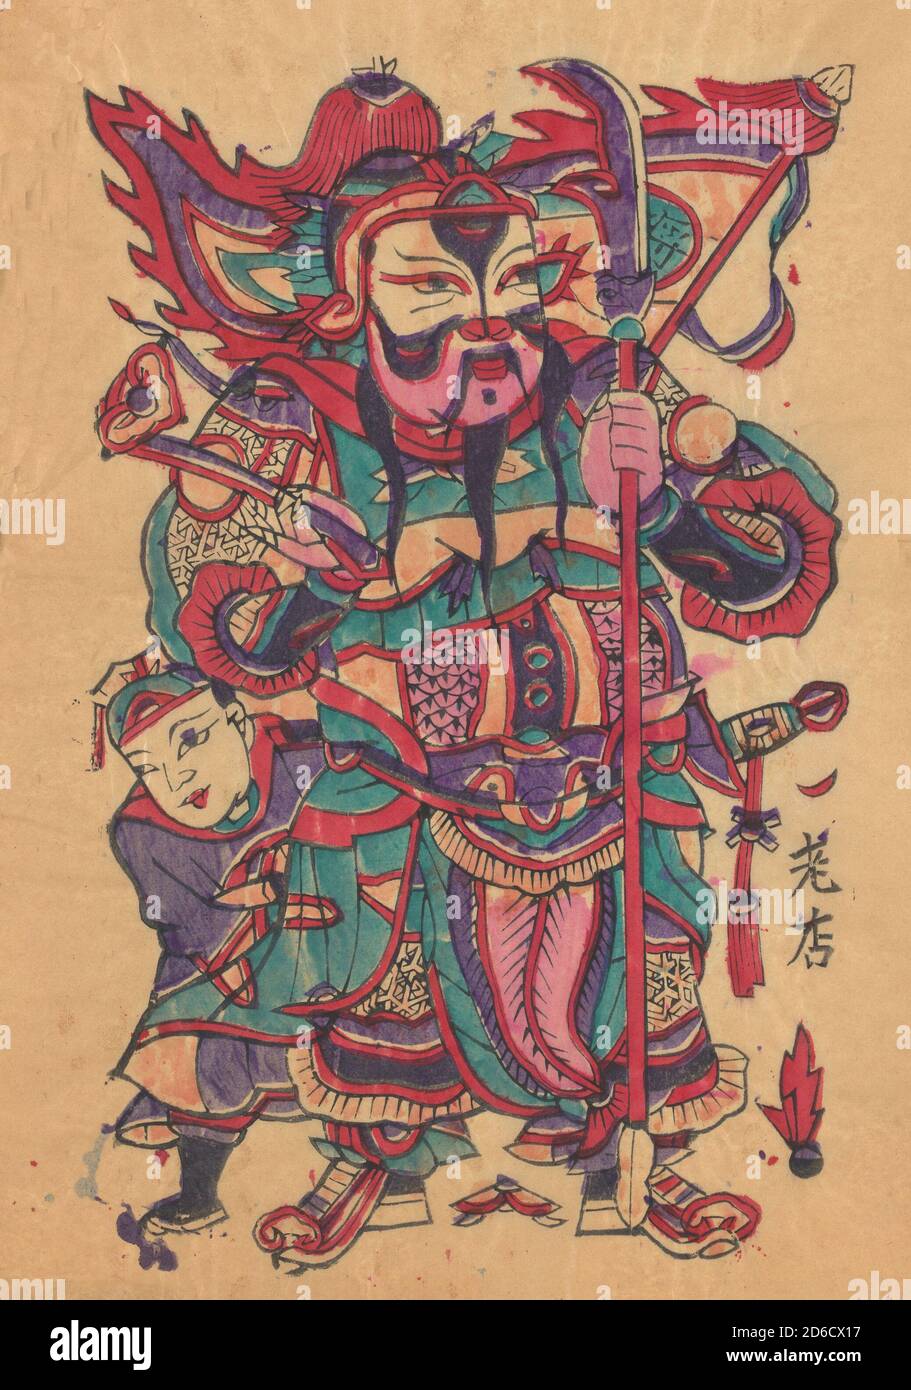 One hundred thirty-five woodblock prints including New Year's pictures (nianhua), door gods, historical figures and Taoist deities, 19th-20th century. Stock Photo